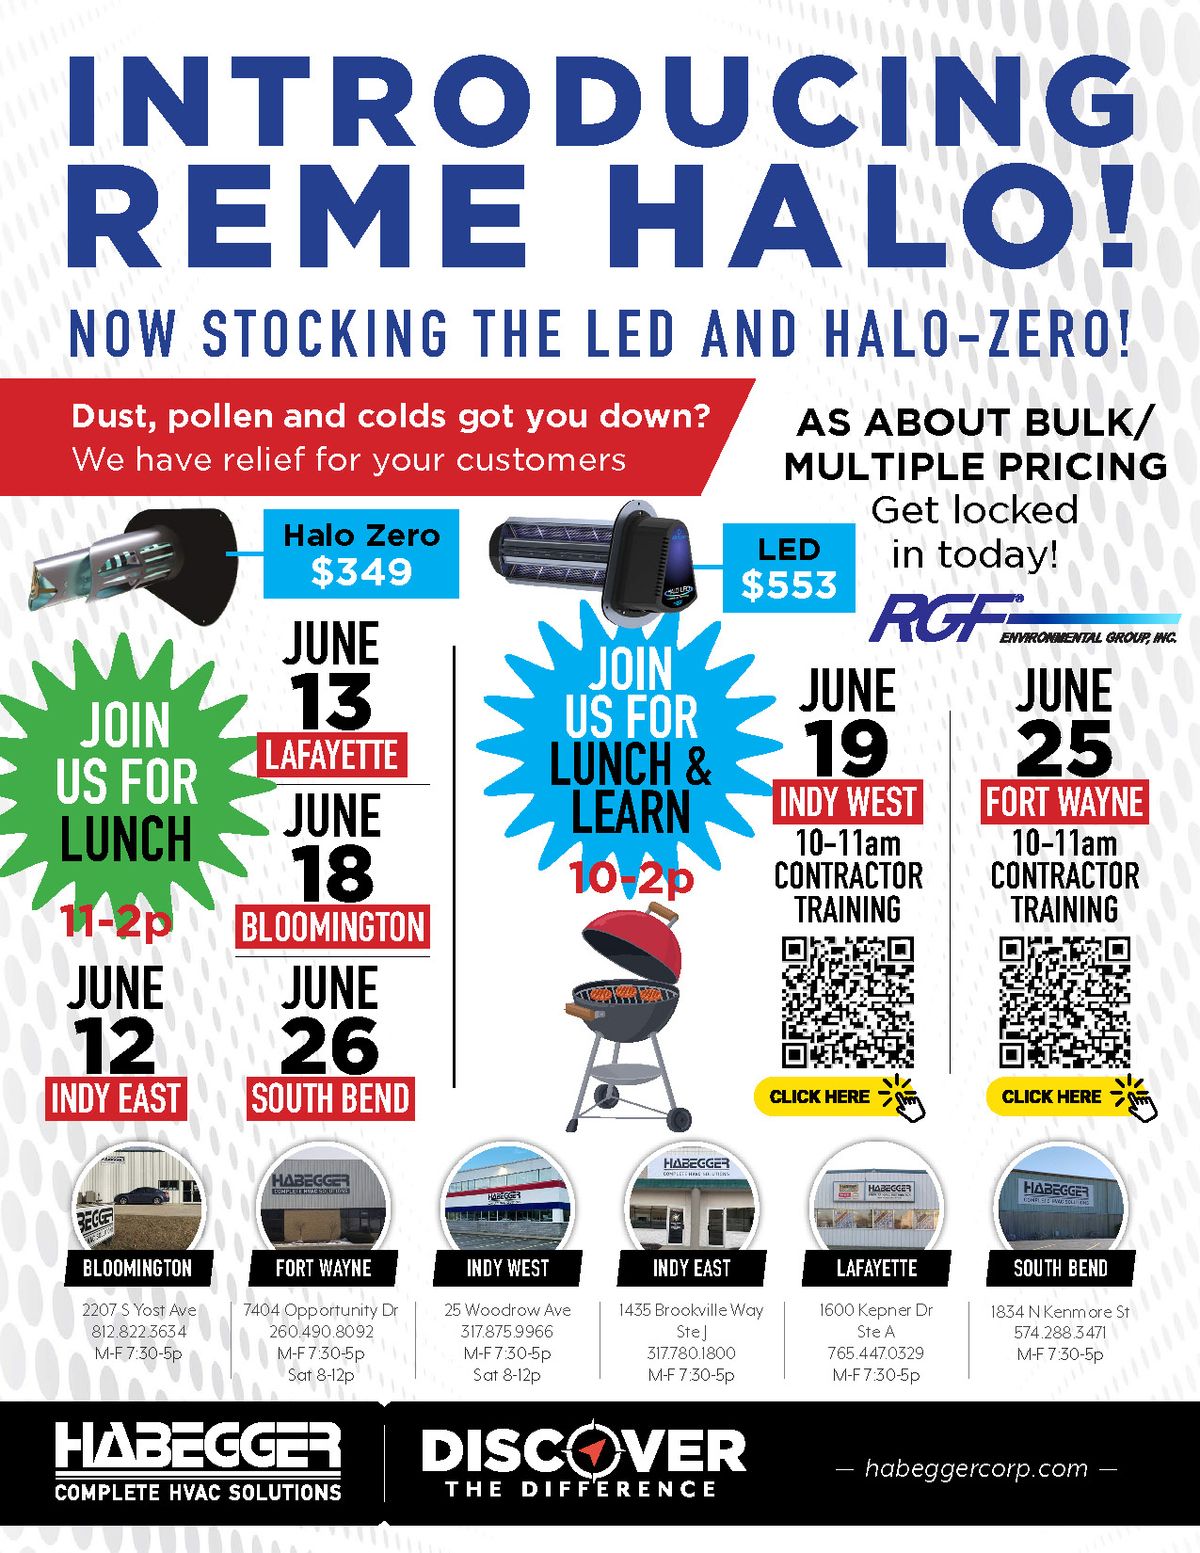 LUNCH & TRAINING WITH REME HALO - Bloomington